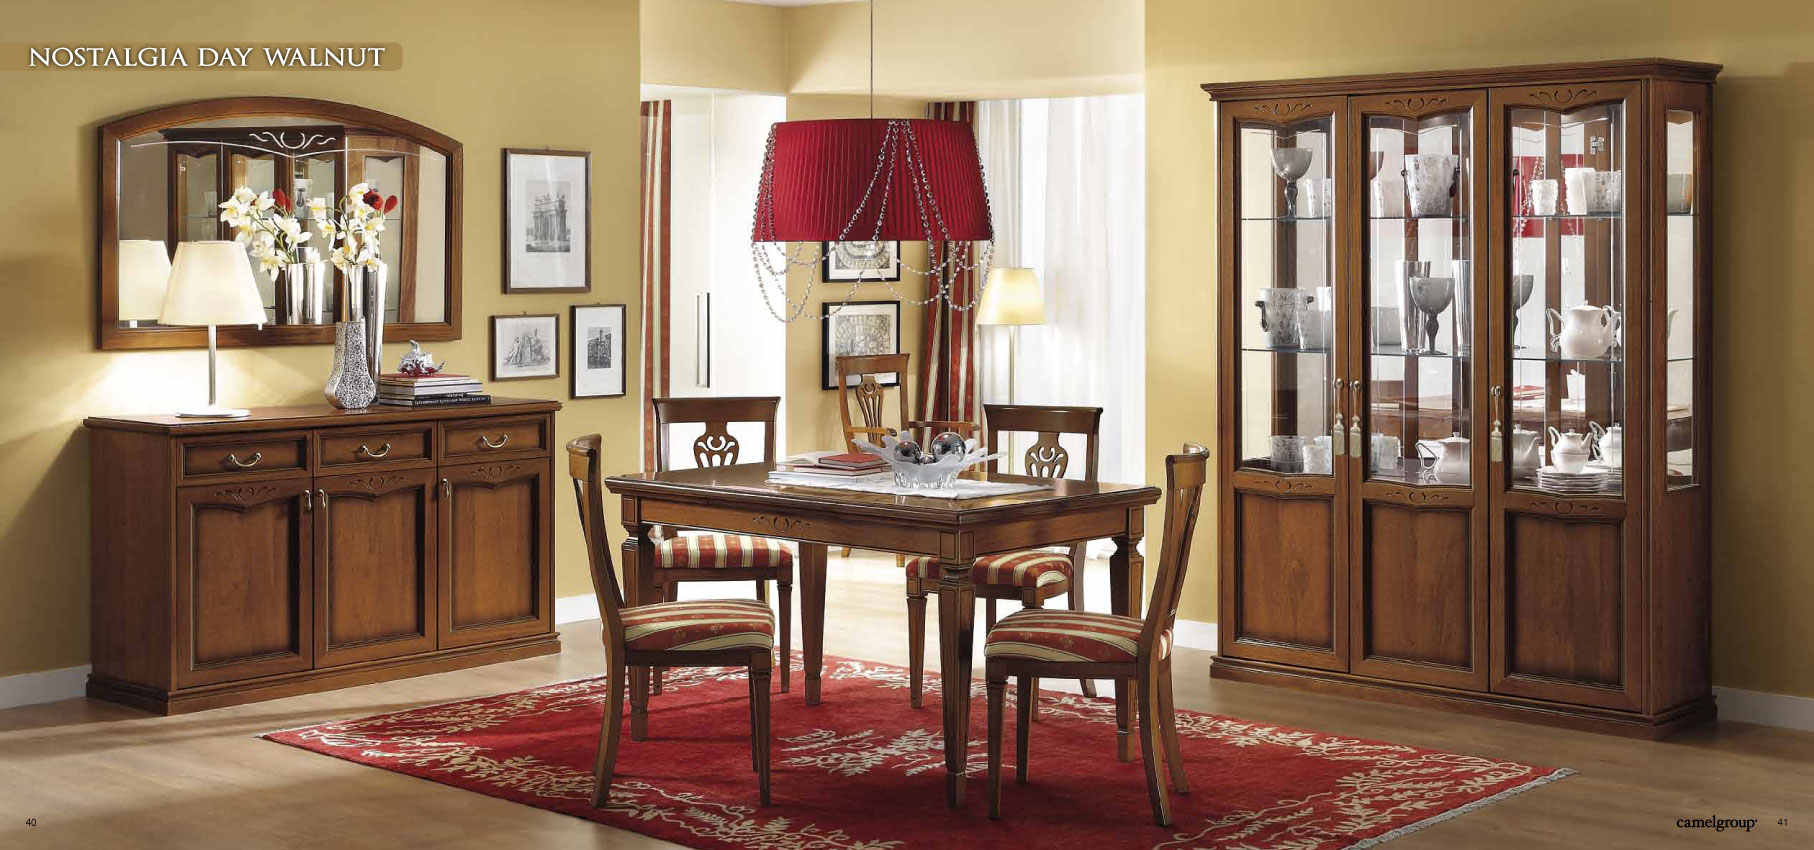 Dining Room Furniture Classic Dining Room Sets Nostalgia Day Walnut